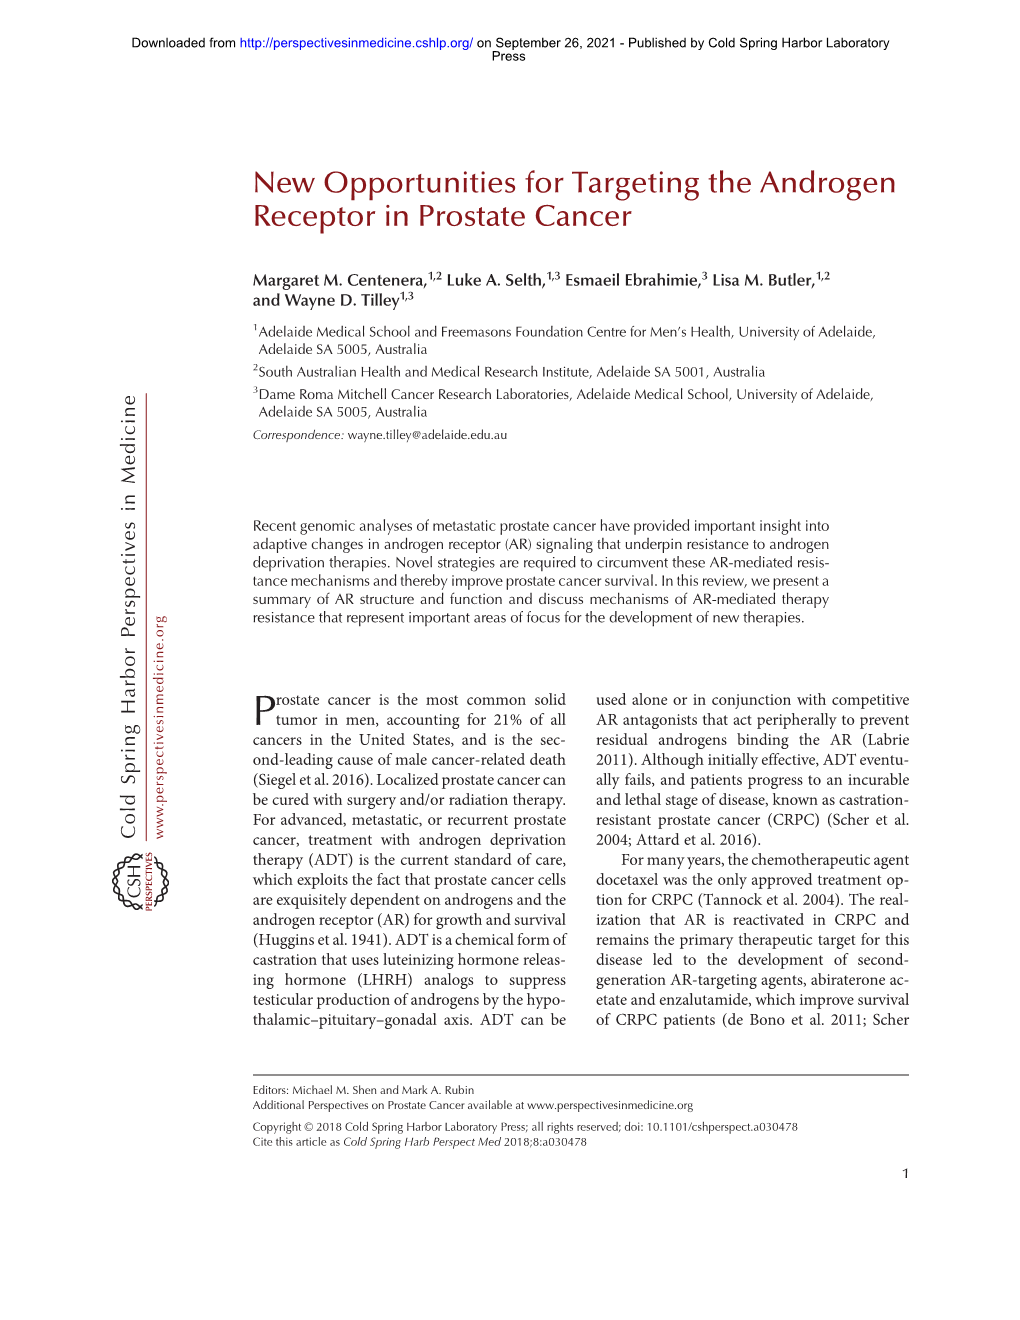 New Opportunities for Targeting the Androgen Receptor in Prostate Cancer